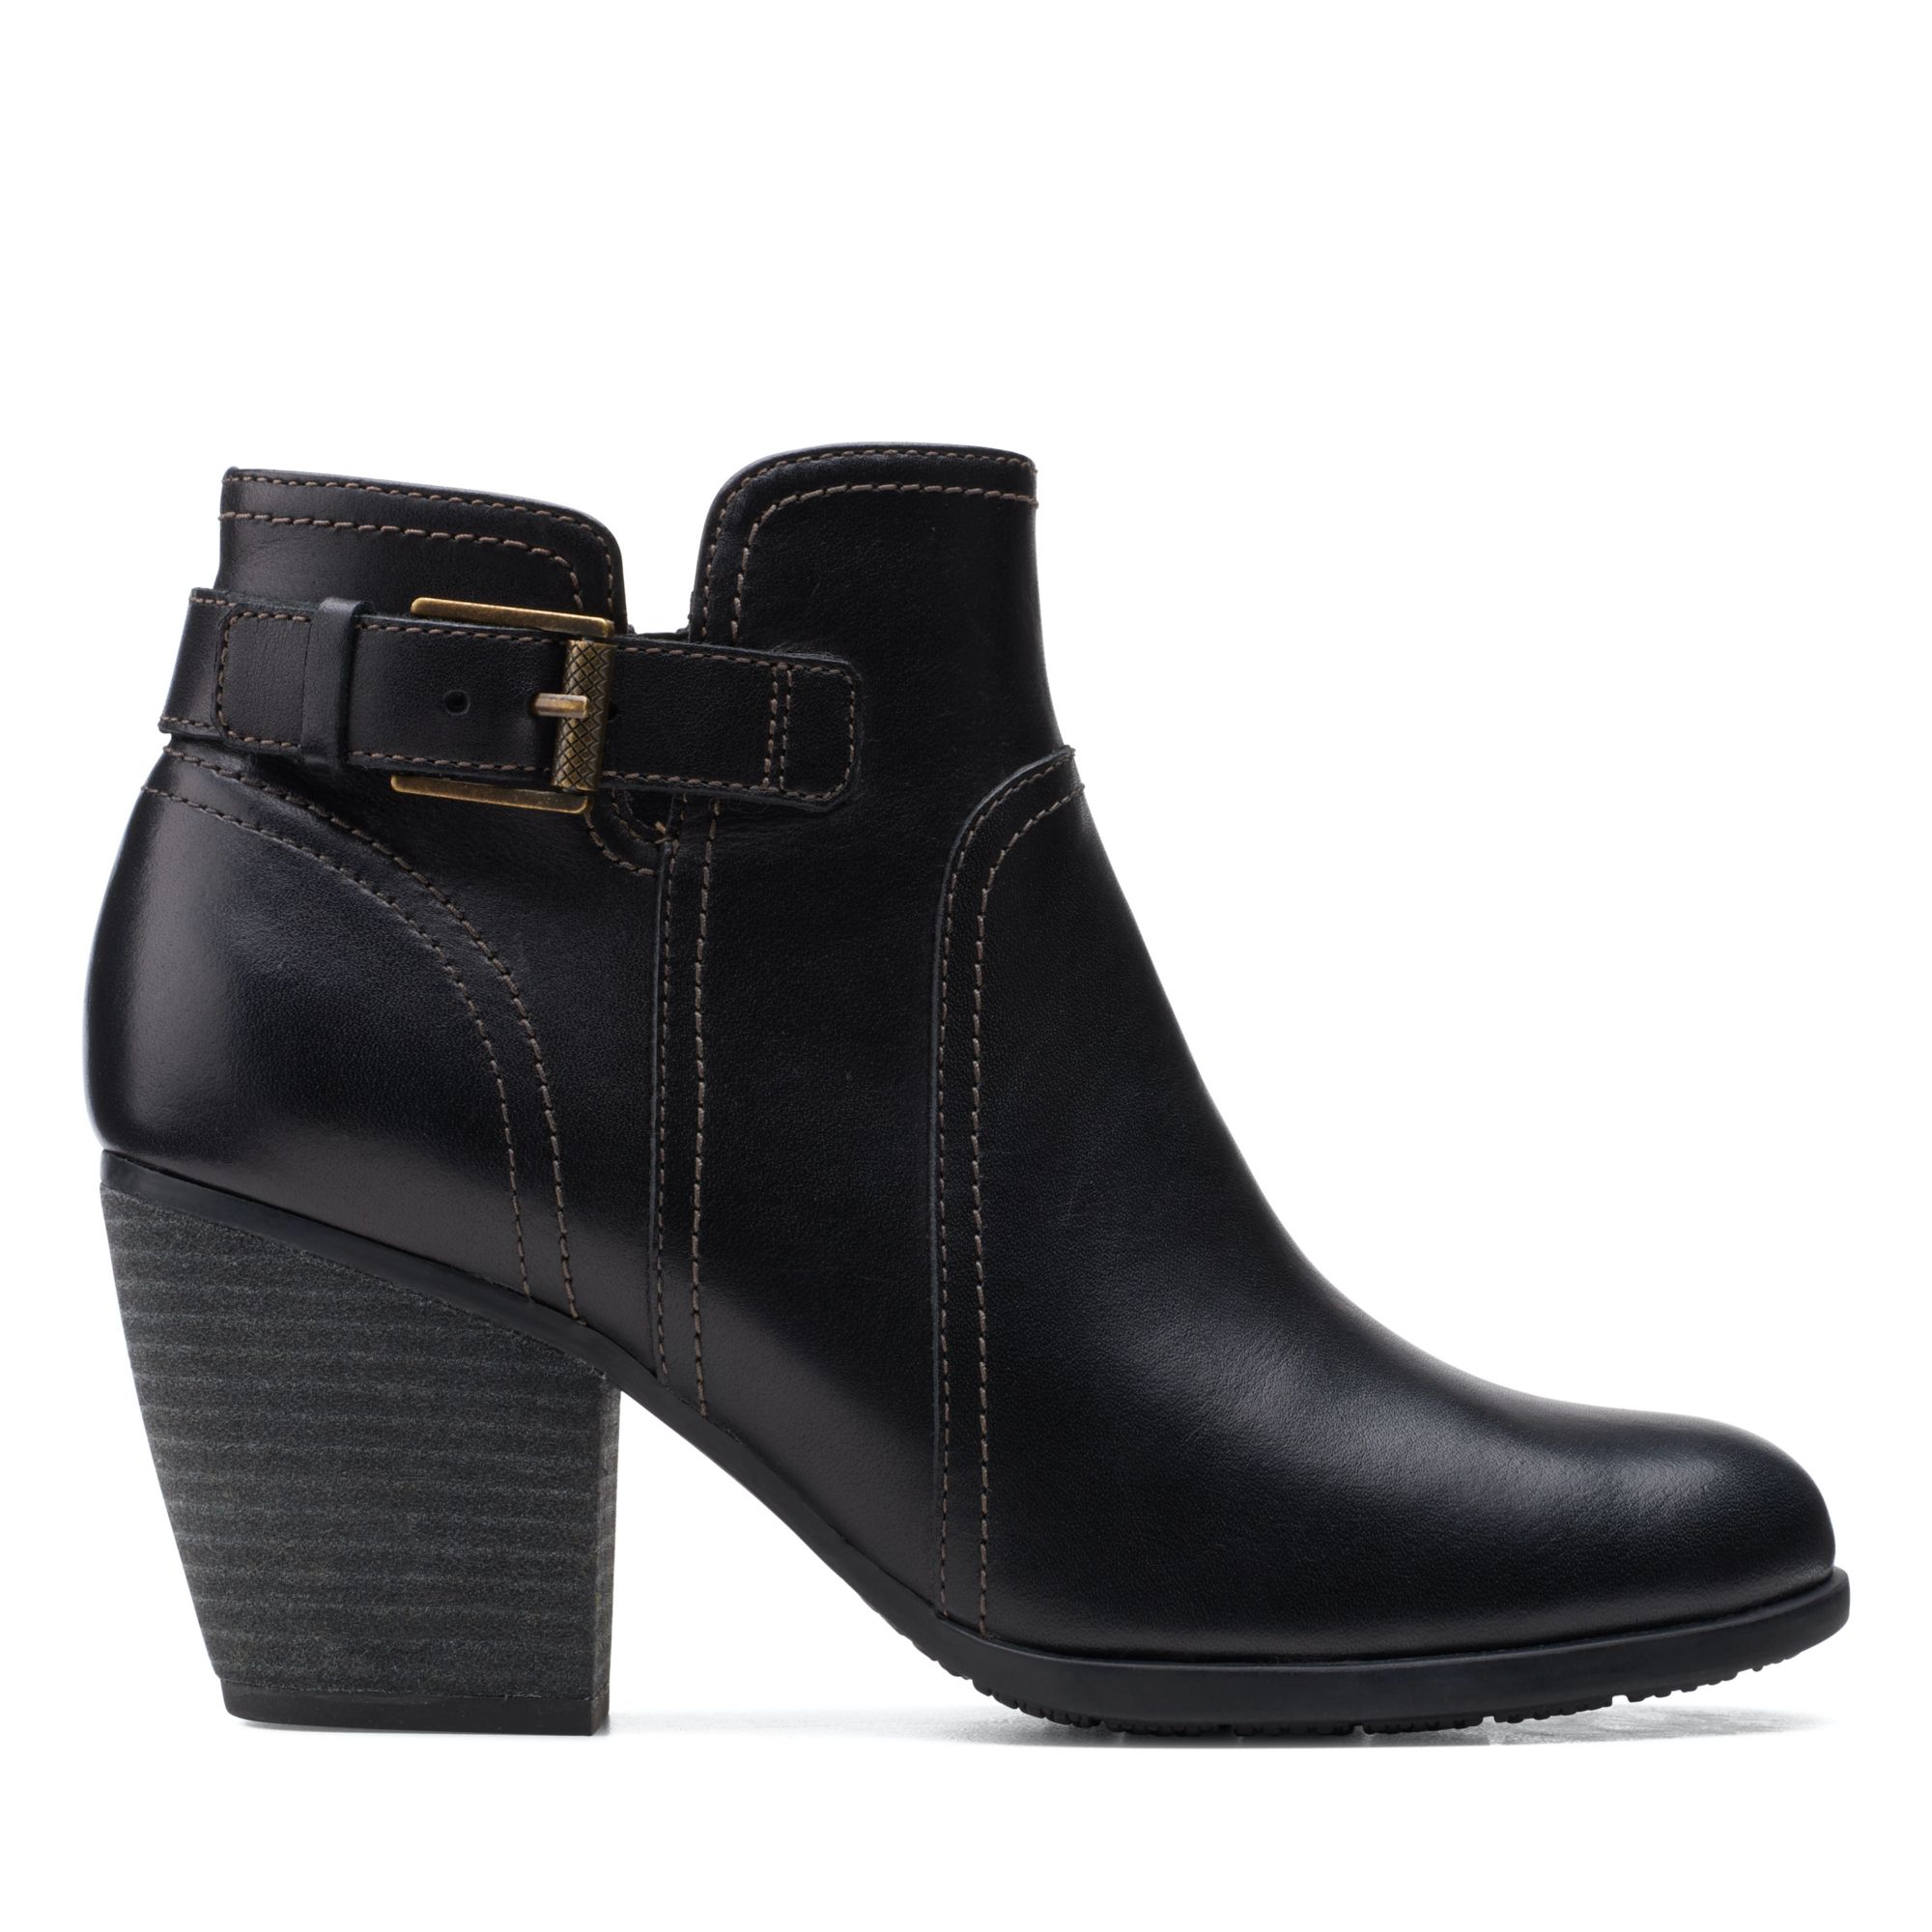 Clarks Womens Bergen Vibe Black Leather Heeled Ankle Boots | eBay